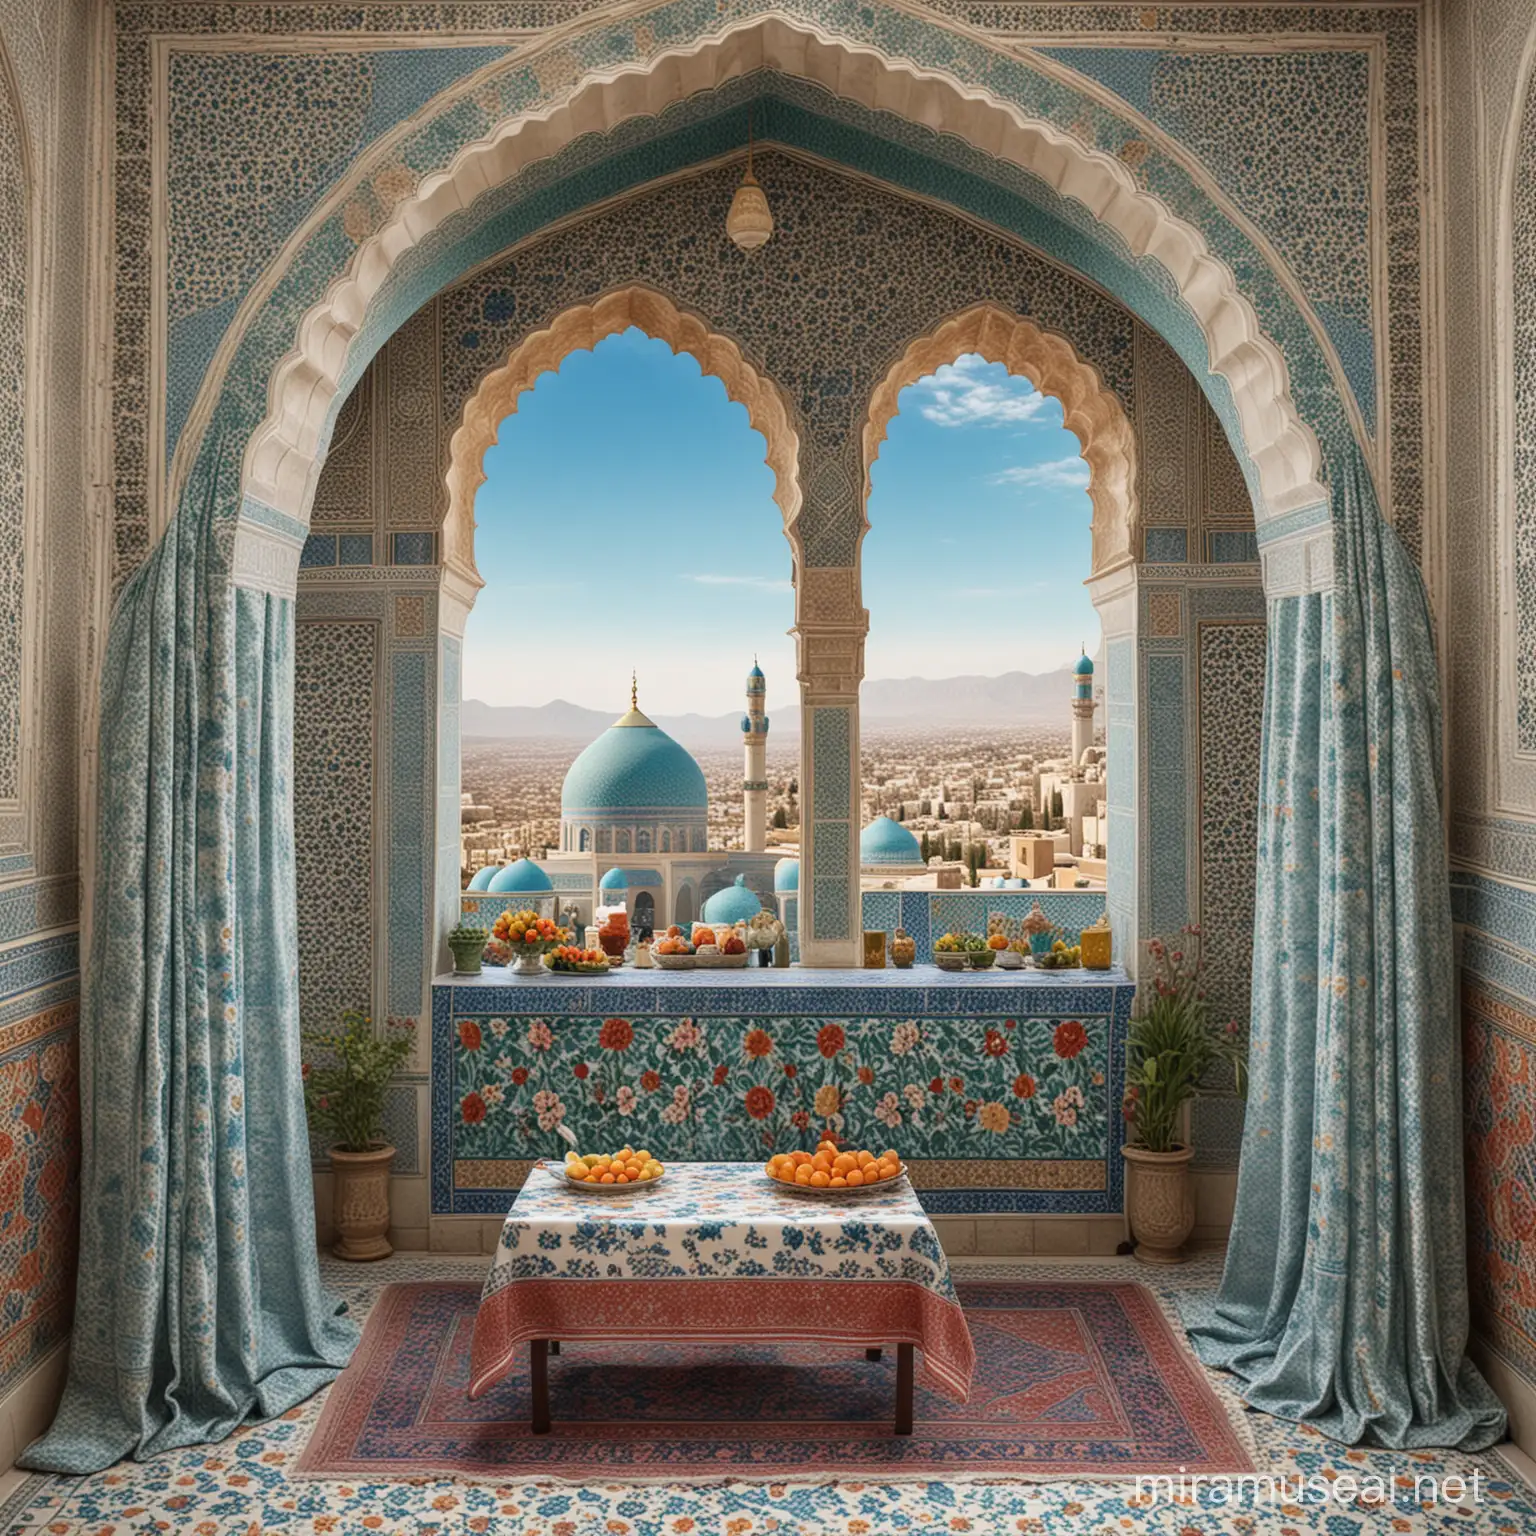 view from a white marbled Timurid arch decorated with red blue gold persian tiles design, in front is a tablecloth full of blue white porcelain utensils with many fruits grapes bananas apples, rose tulip flowers and drinks, arabian lantern on table, curtain on side, view of White blue red floral arabesque tiled islamic mosque castle having white red blue persian decoration on exterior walls, turquoise tiled dome, persian tiles with persian designs on facades, beyond a vast sea, calm cloudy sky with stars and cresent moon, front view perspective --sref https://cdn.discordapp.com/attachments/1213041174428782623/1221744135715688468/huilo_different_Fruits_a_drink_roses_flowers_View_of_huge_Islam_cac6e4c5-9b2a-44ed-8e73-2c62320e604d.png?ex=6613b0e4 --ar 3:5